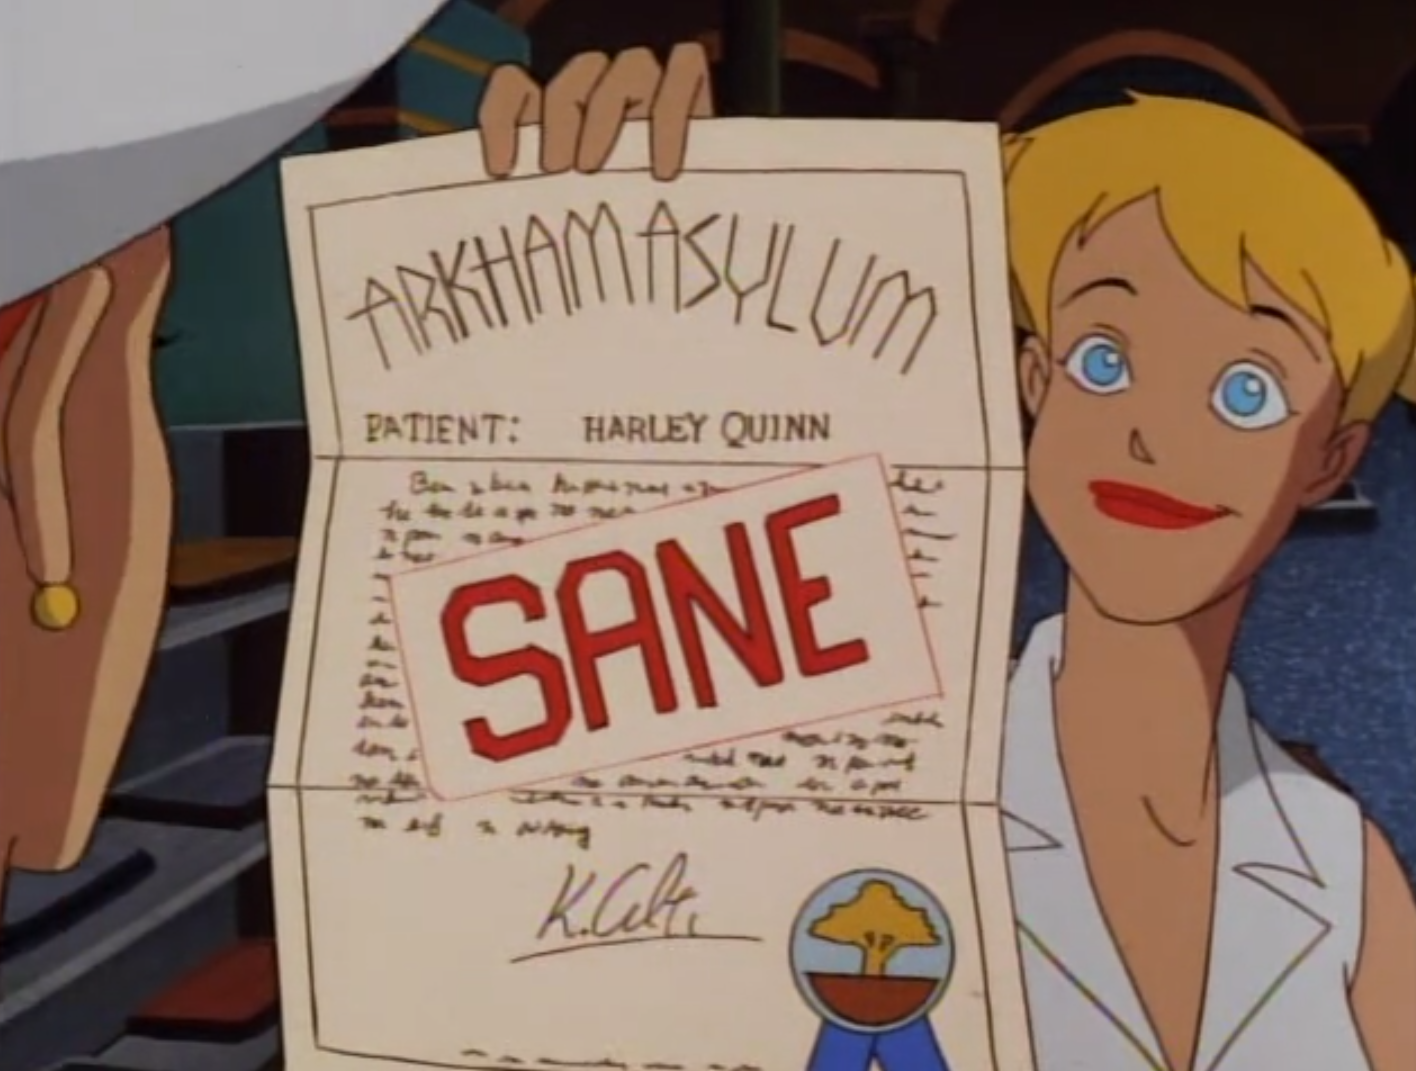 Harley Quinn proudly proclaims her sanity to Veronica Vreeland in "Harley's Holiday" from Batman: The Animated Series.